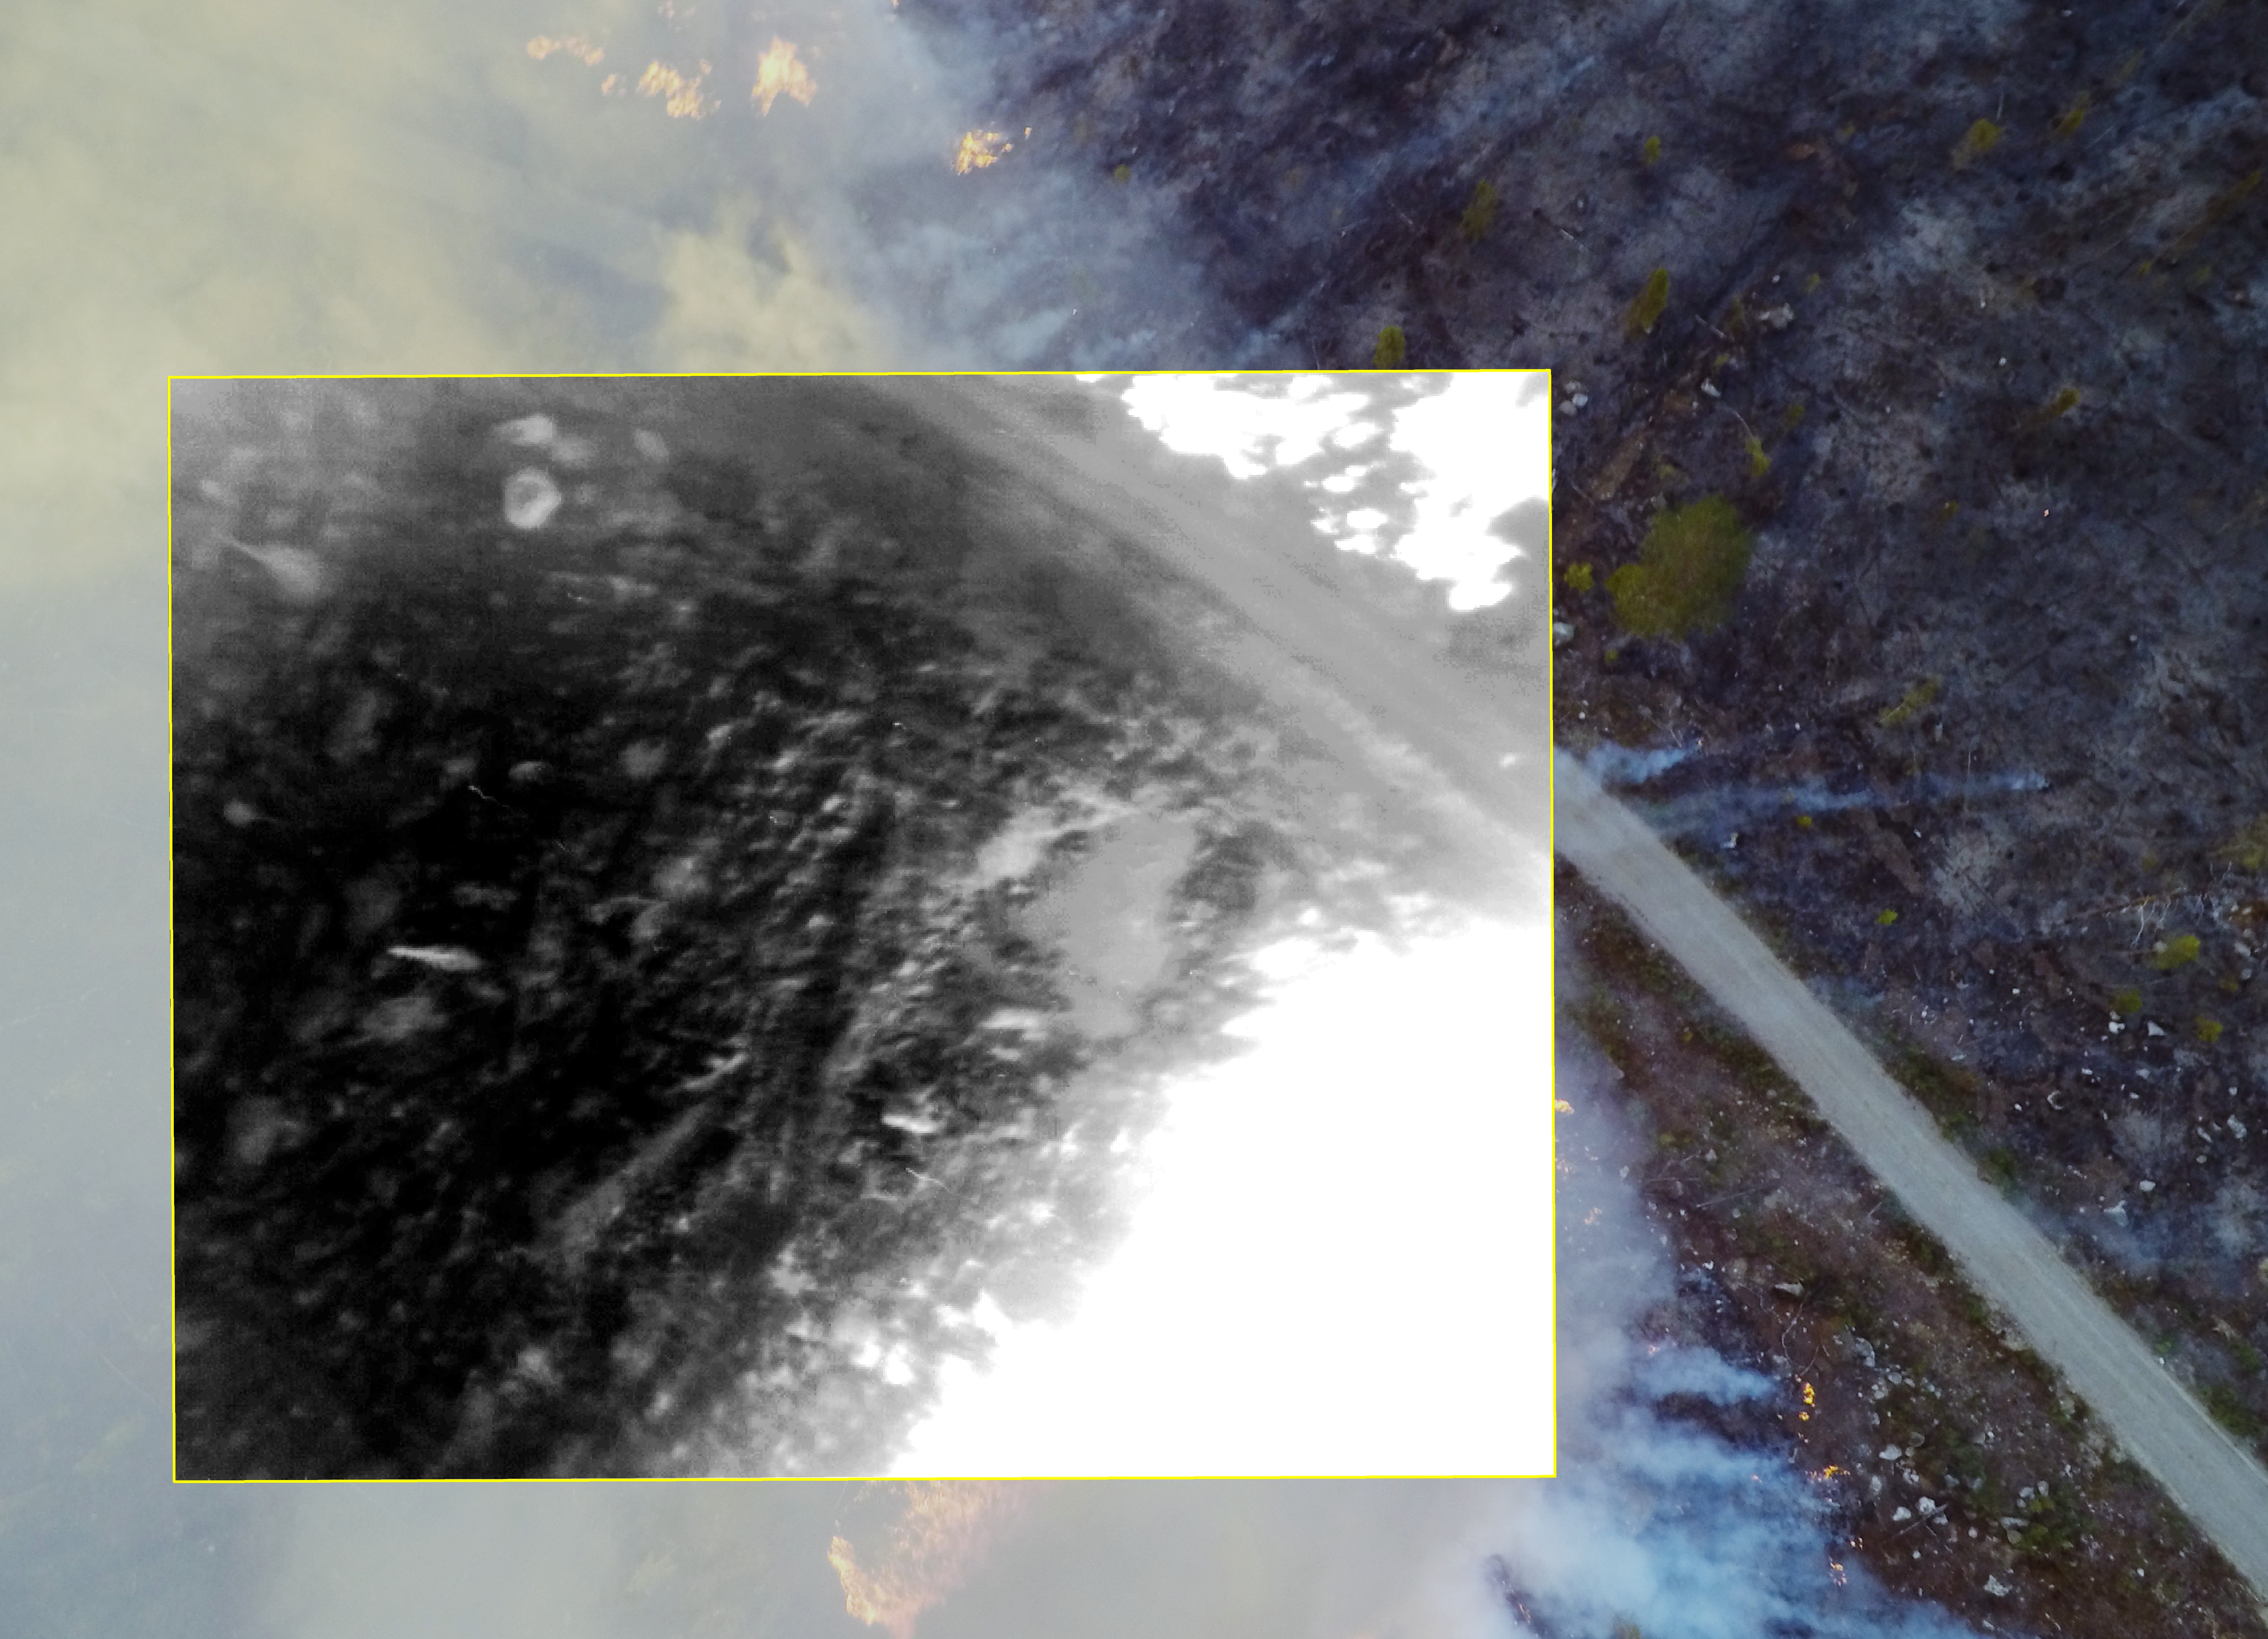 Same as georef1_rgb.jpg, but a thermal image overlaid. White color is warm and black is cold. Note the hot area on the right side of the road which only can be seen in the thermal image.